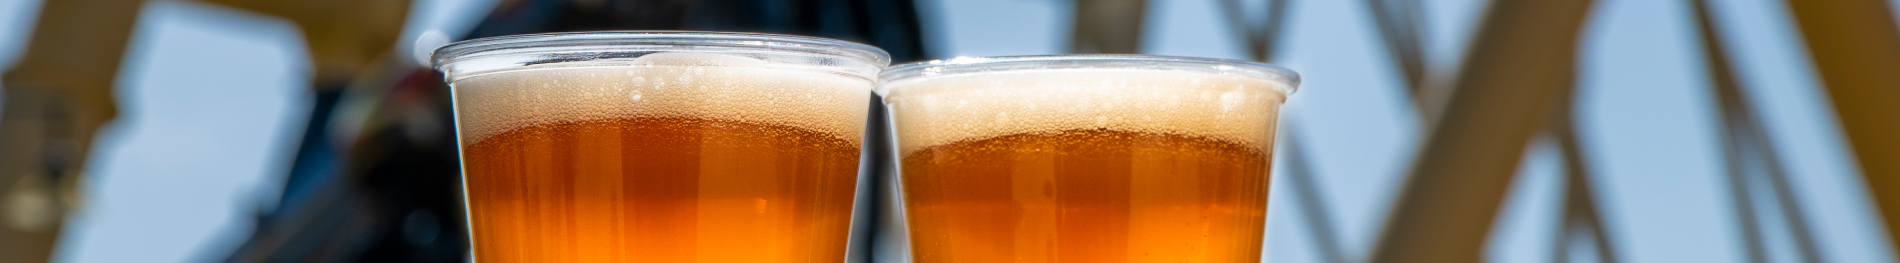 Free Beer is back at Busch Gardens Tampa Bay.